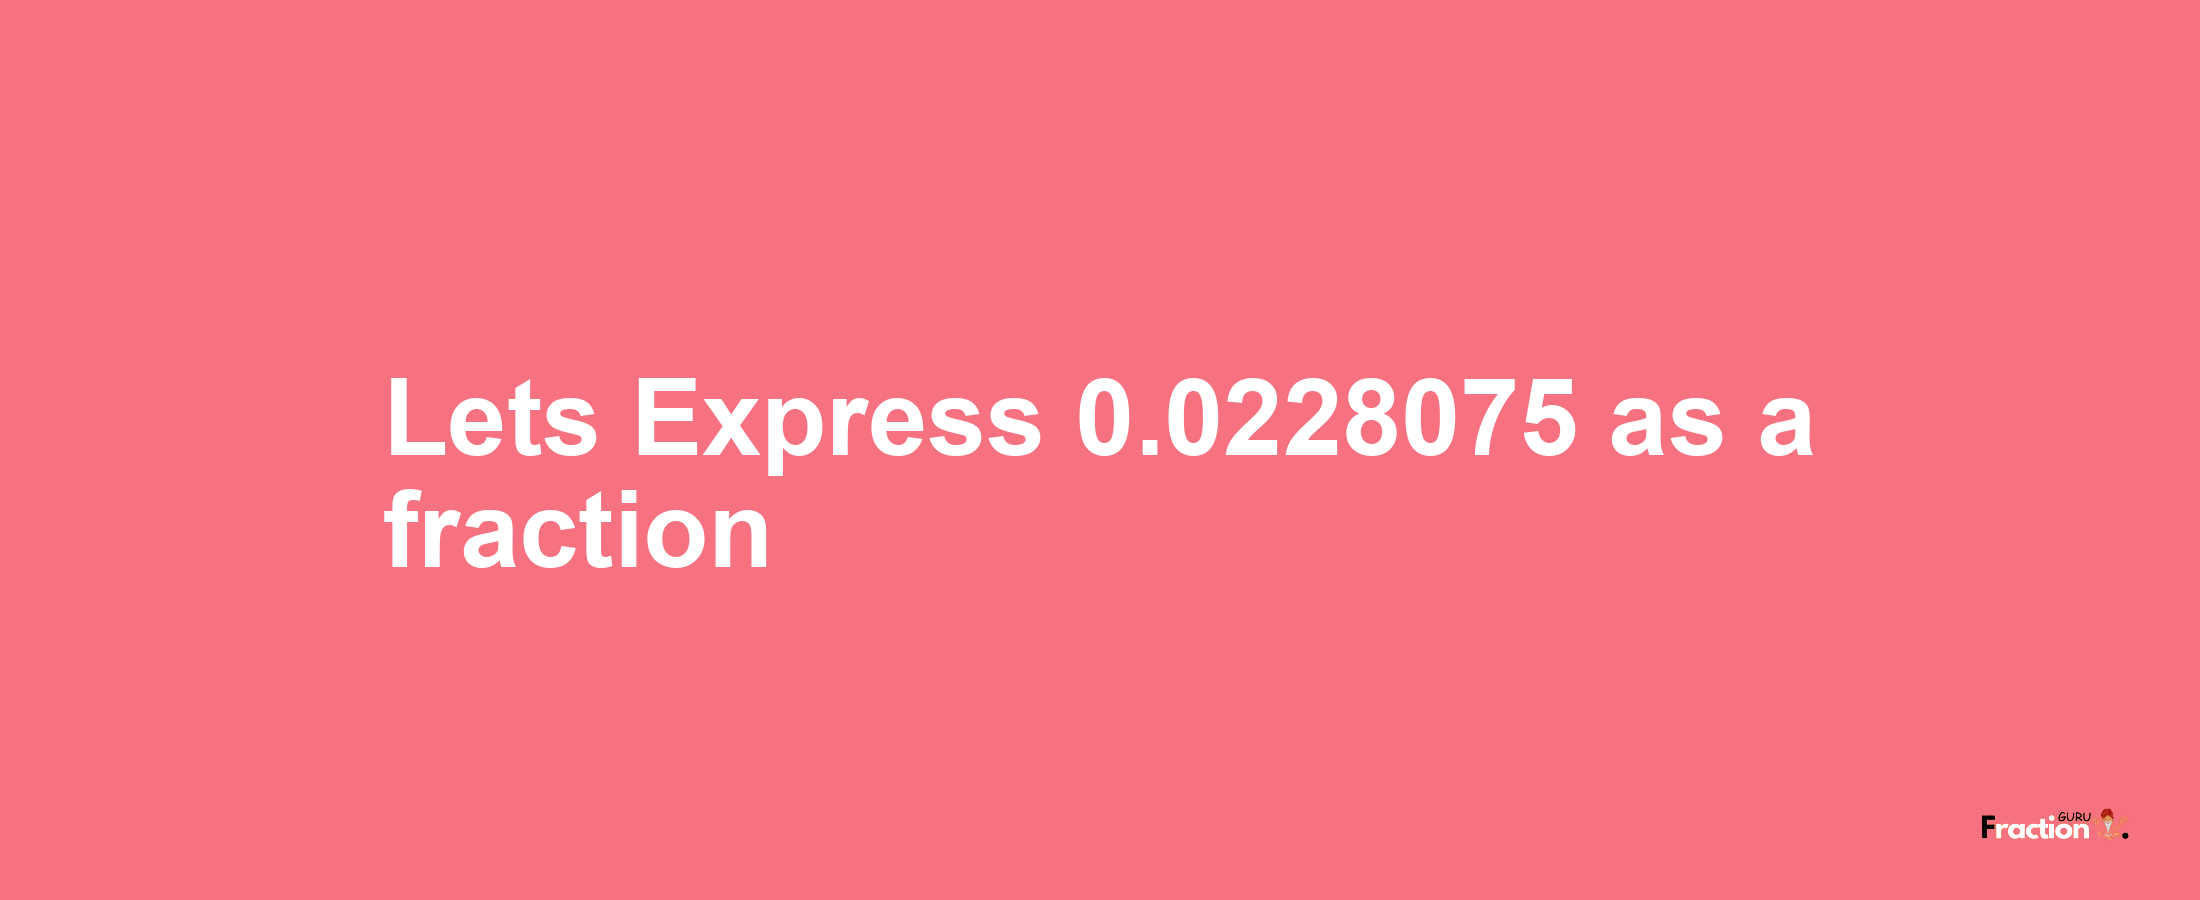 Lets Express 0.0228075 as afraction